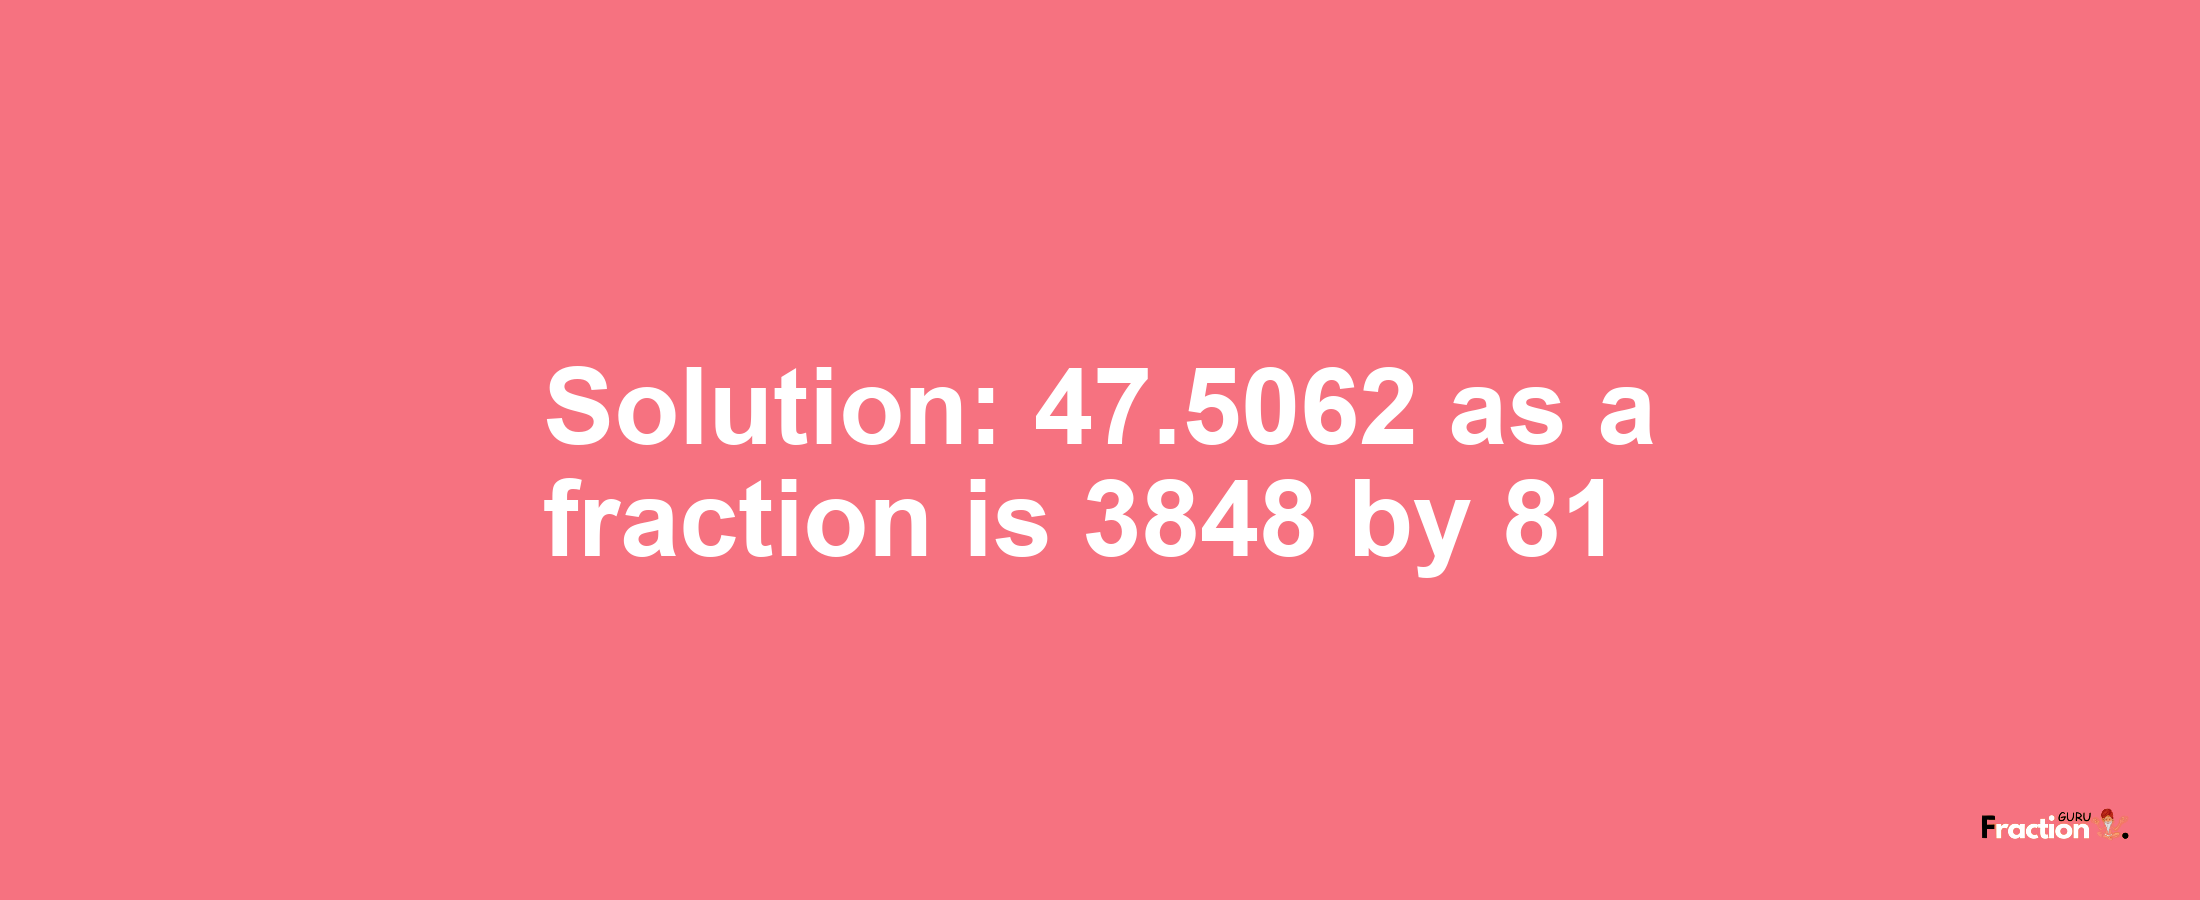 Solution:47.5062 as a fraction is 3848/81